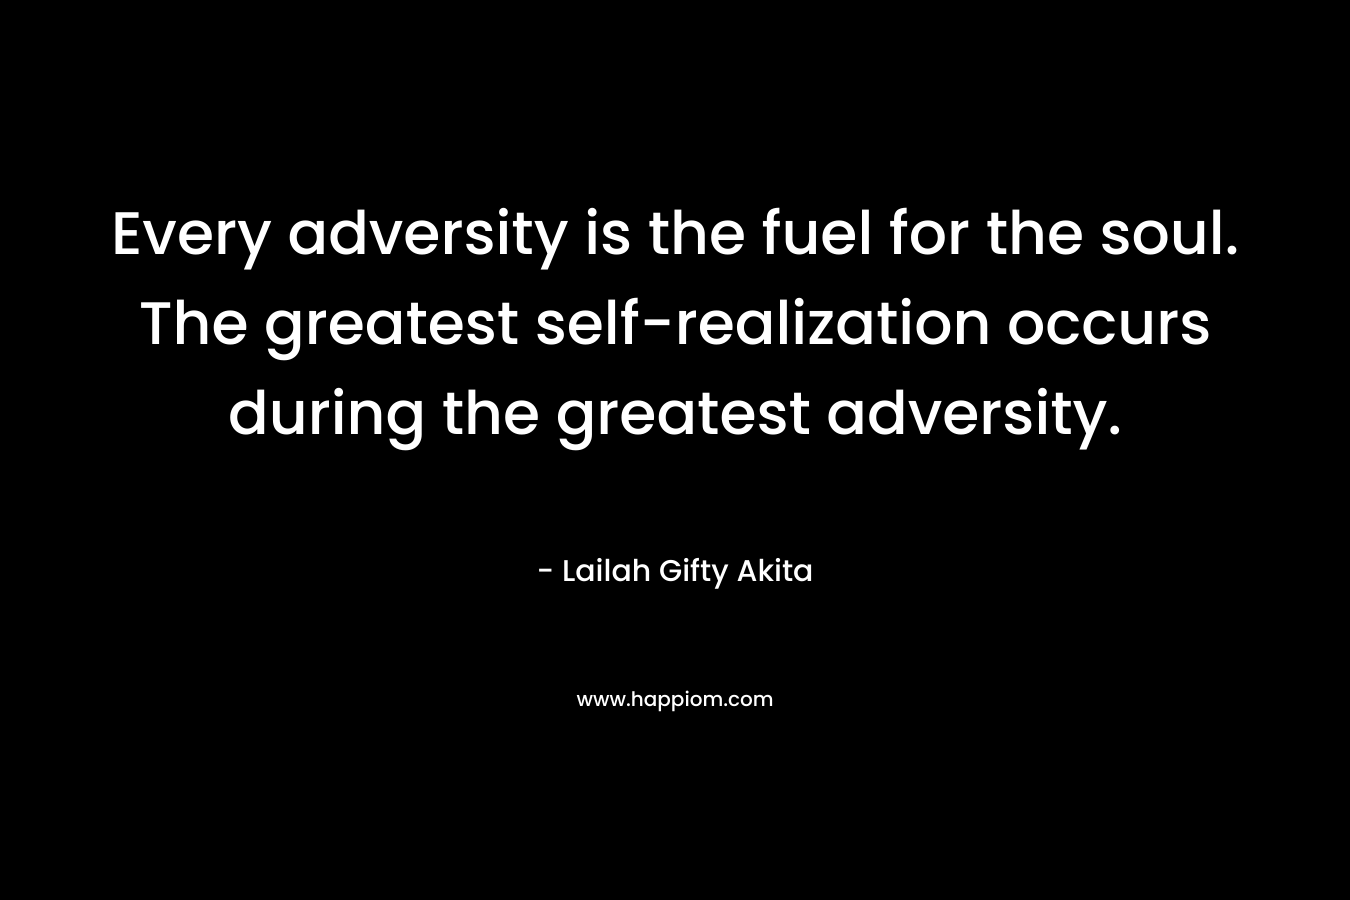 Every adversity is the fuel for the soul. The greatest self-realization occurs during the greatest adversity. – Lailah Gifty Akita